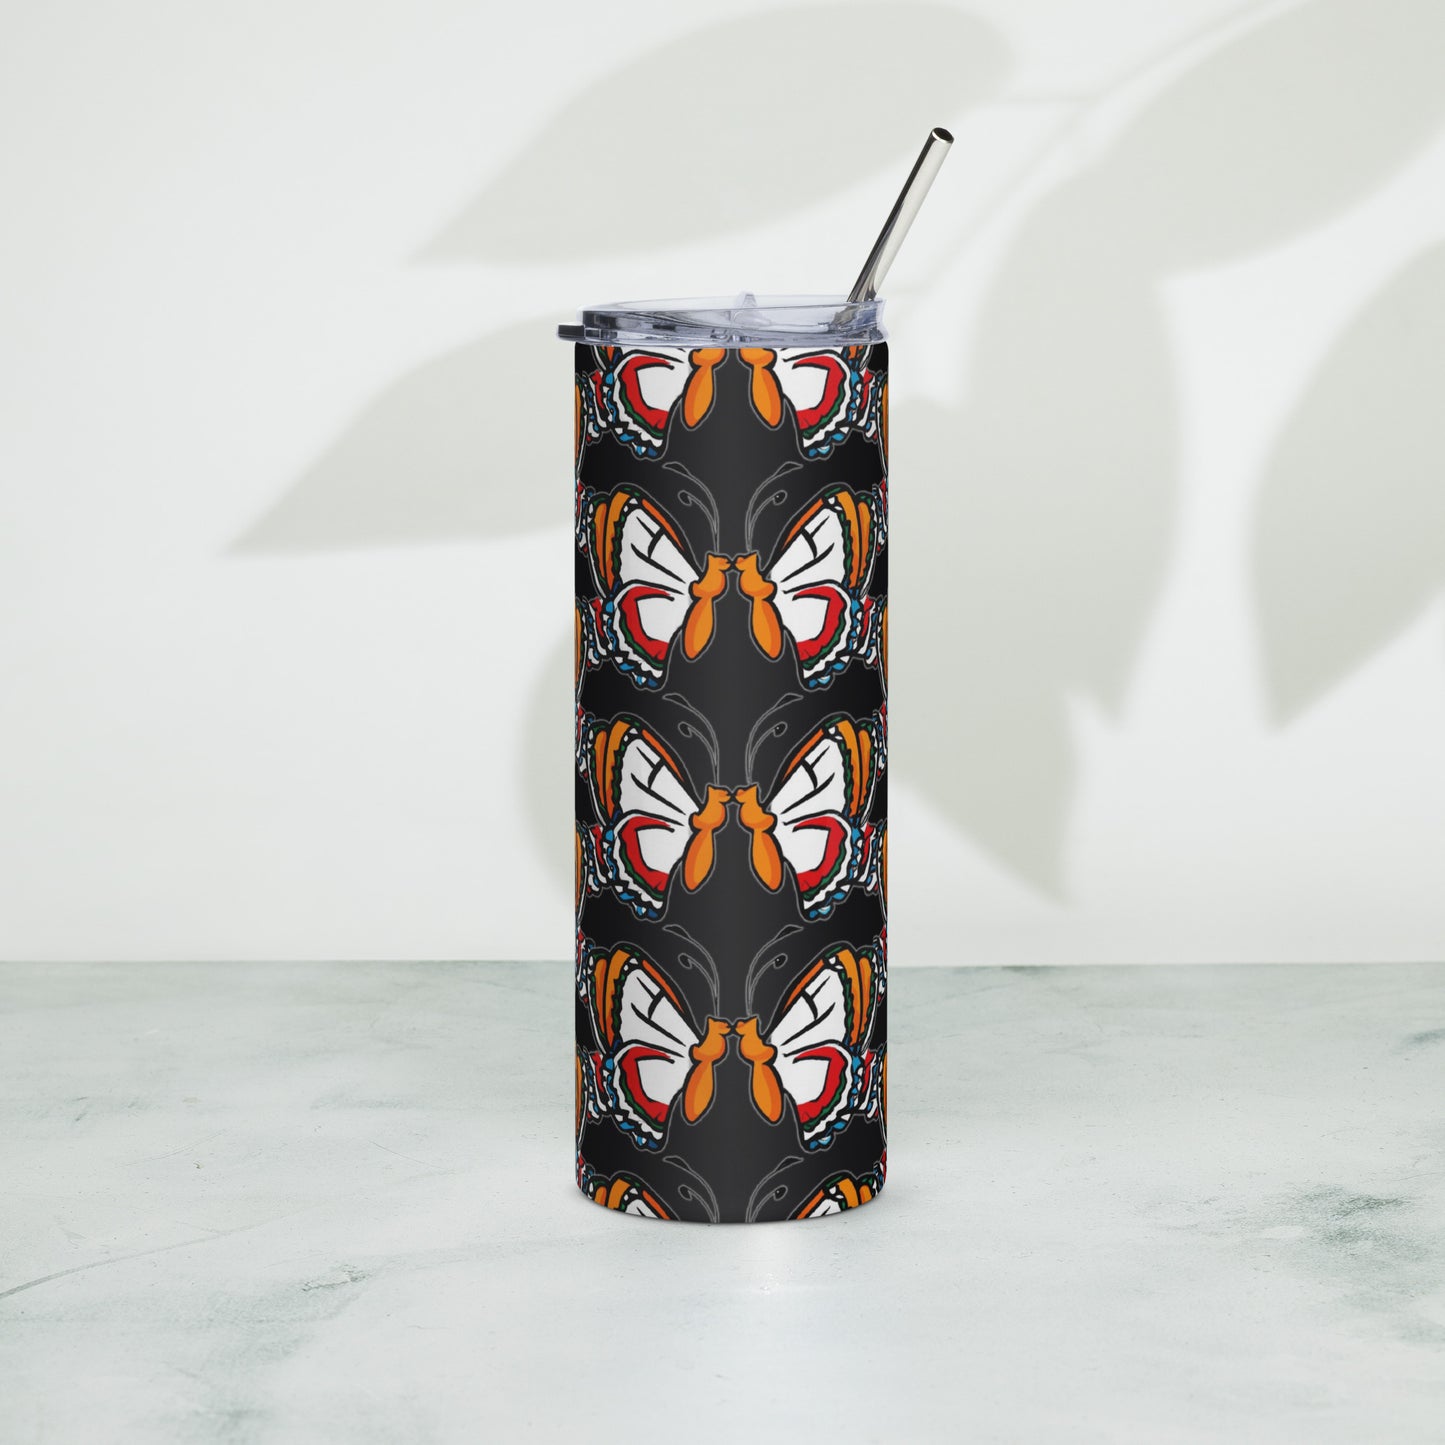 "RichCity_Global" "Butterfly kisses" 1.1 Stainless steel tumbler